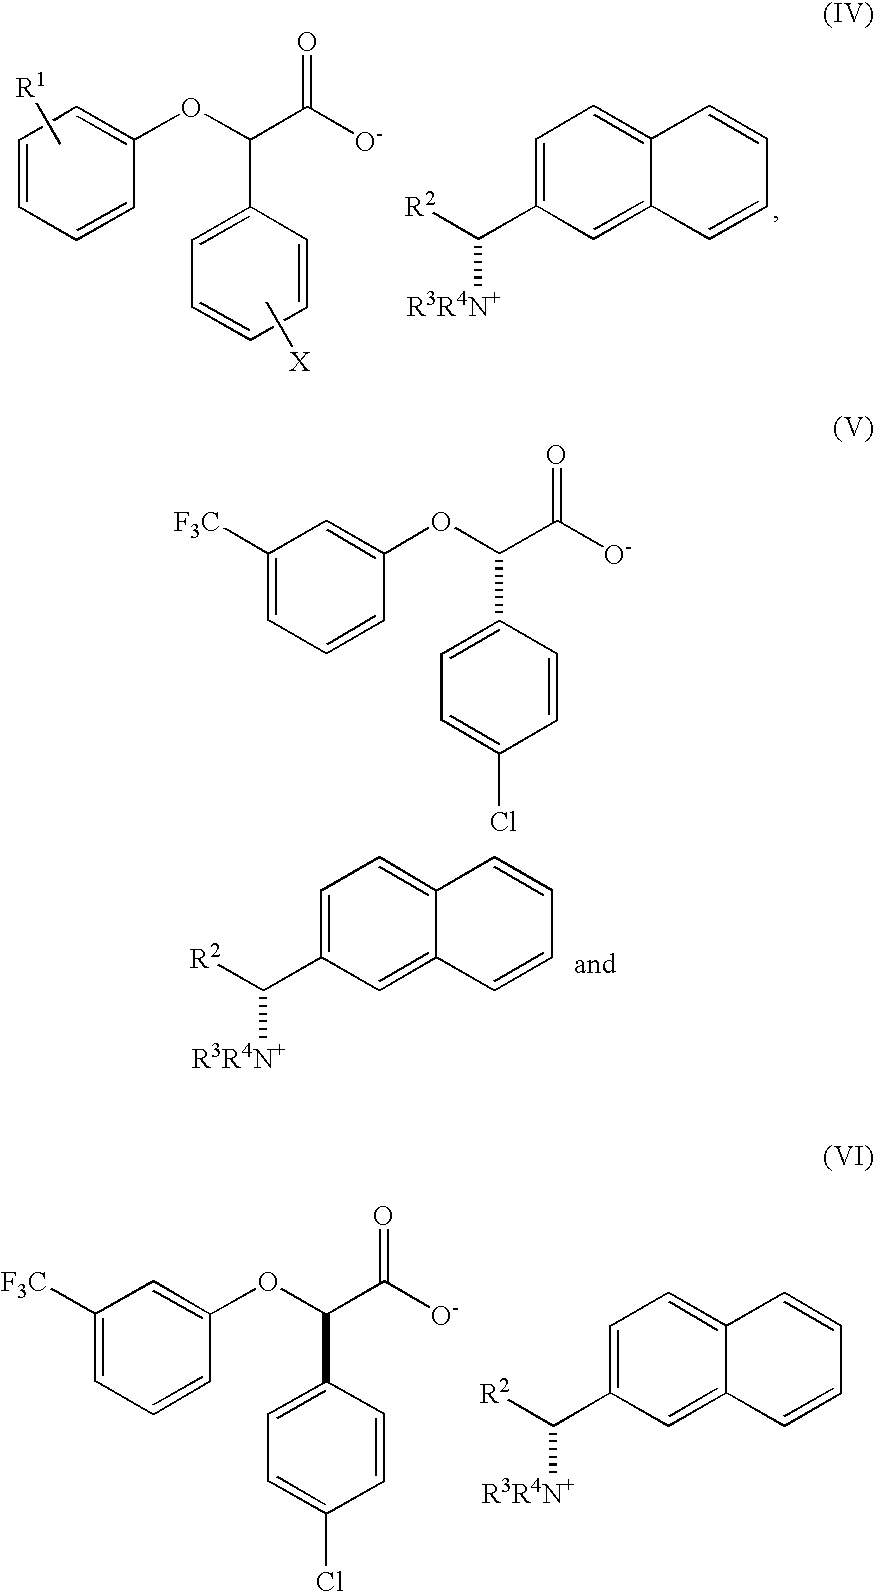 Resolution of alpha-(phenoxy) phenylacetic acid derivatives with naphthyl-alkylamines